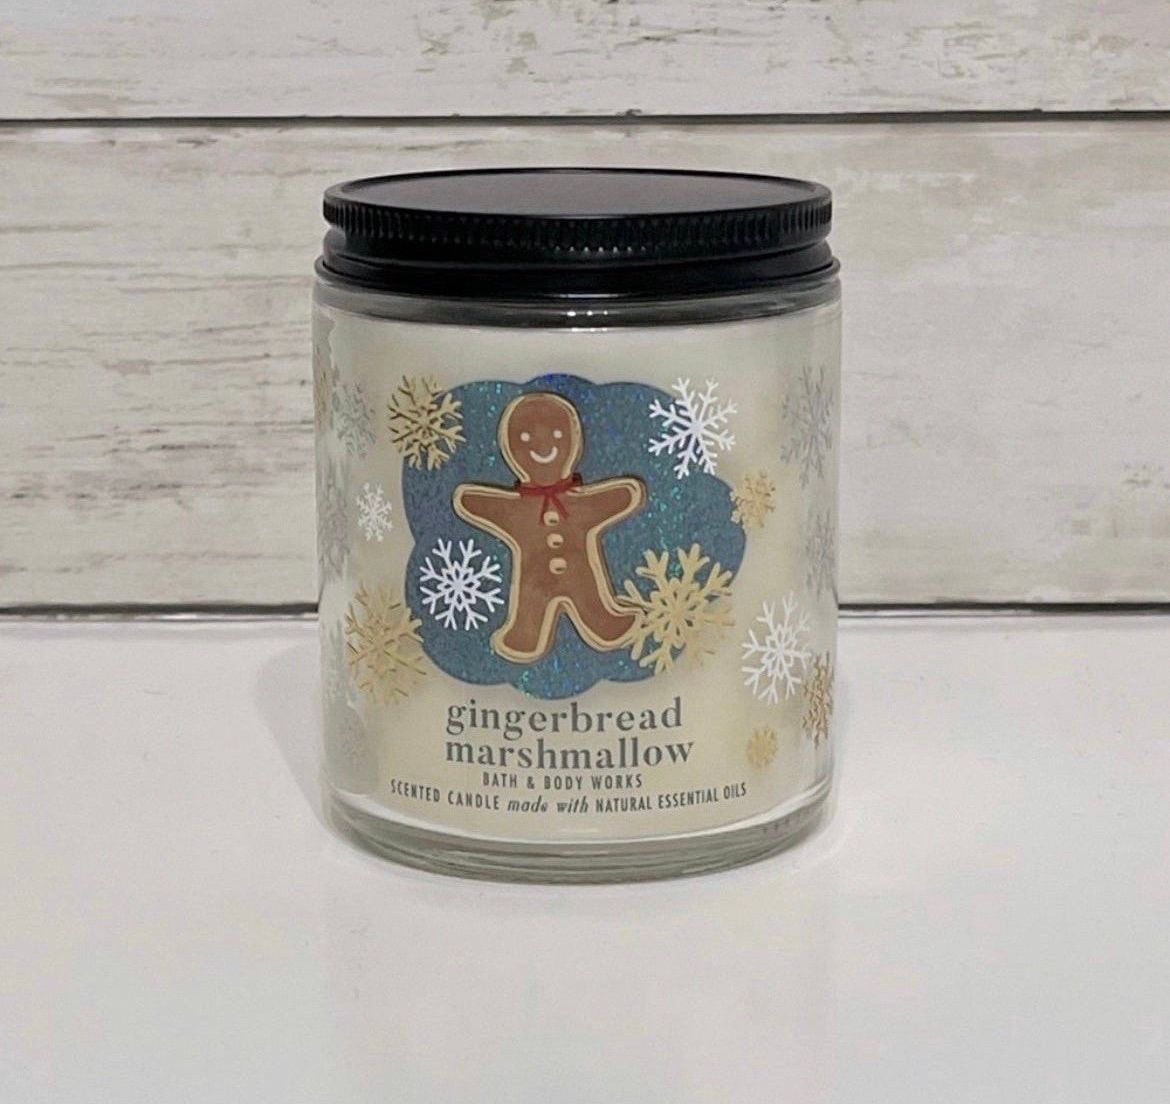 NWT Bath & Body Works Gingerbread Marshmallow Single Wick Candle